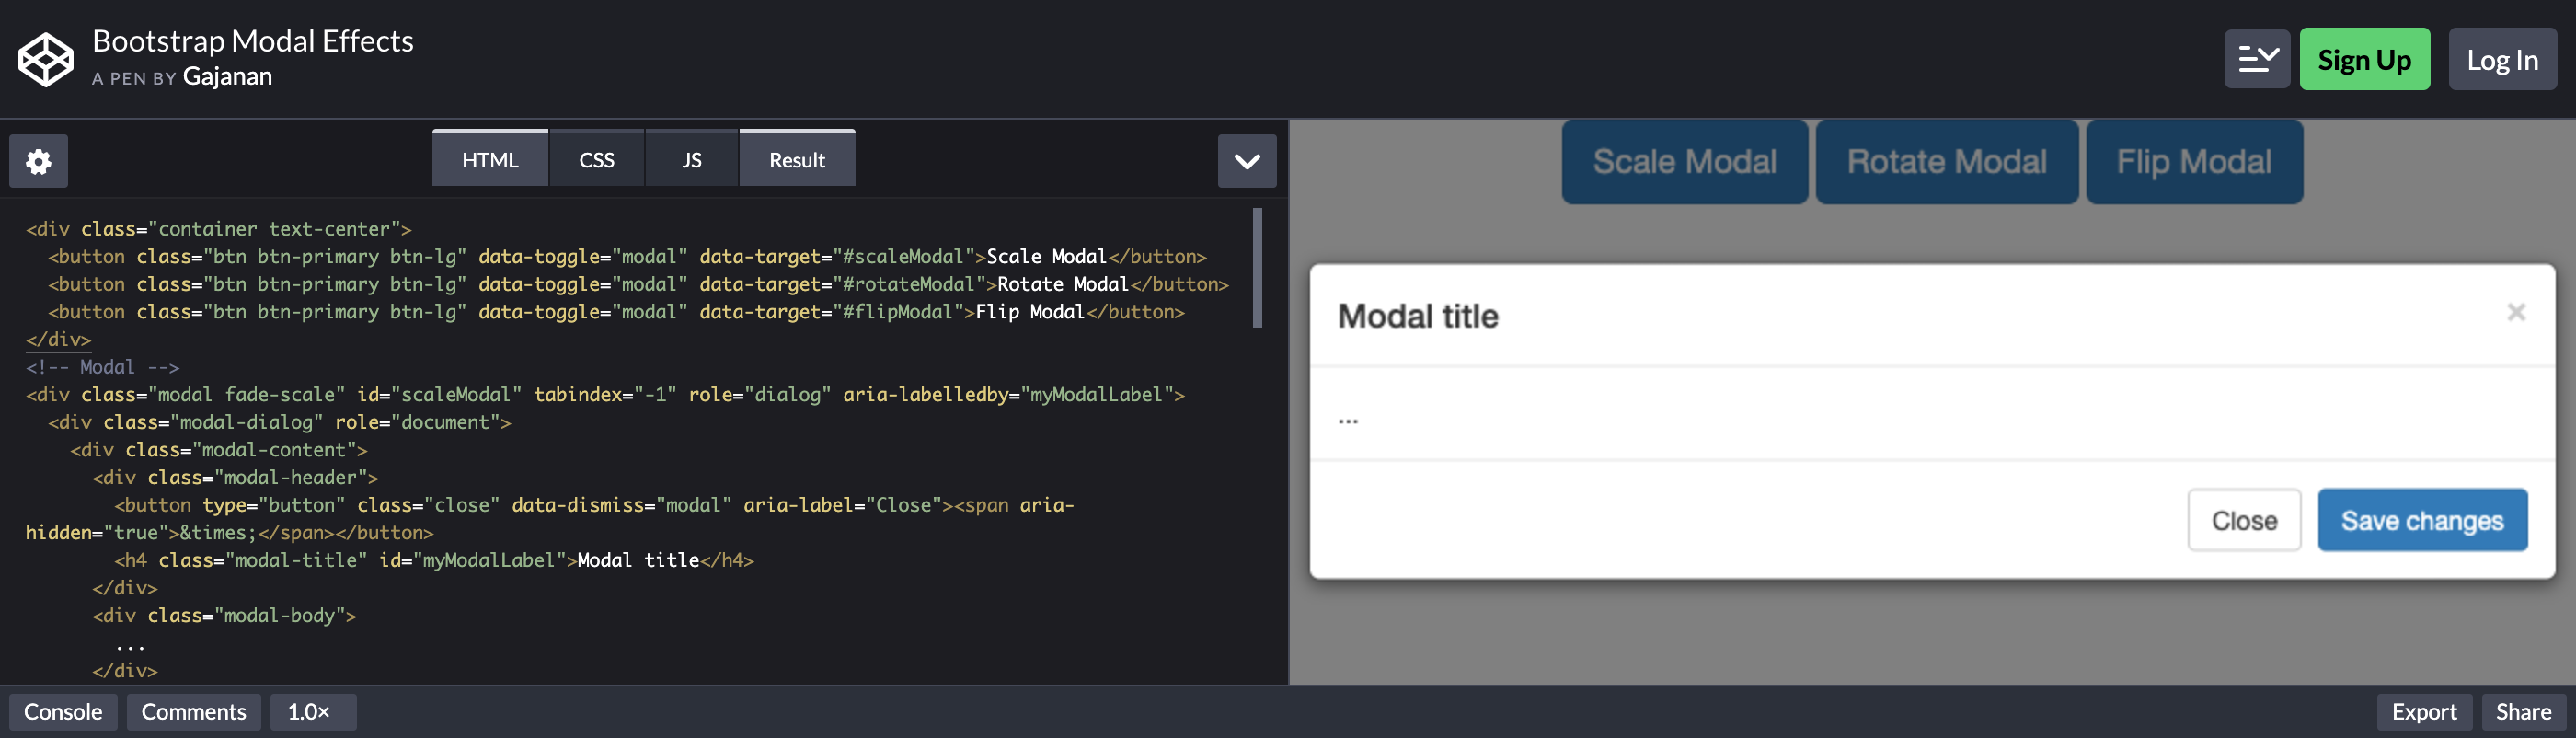 bootstrap modal effects